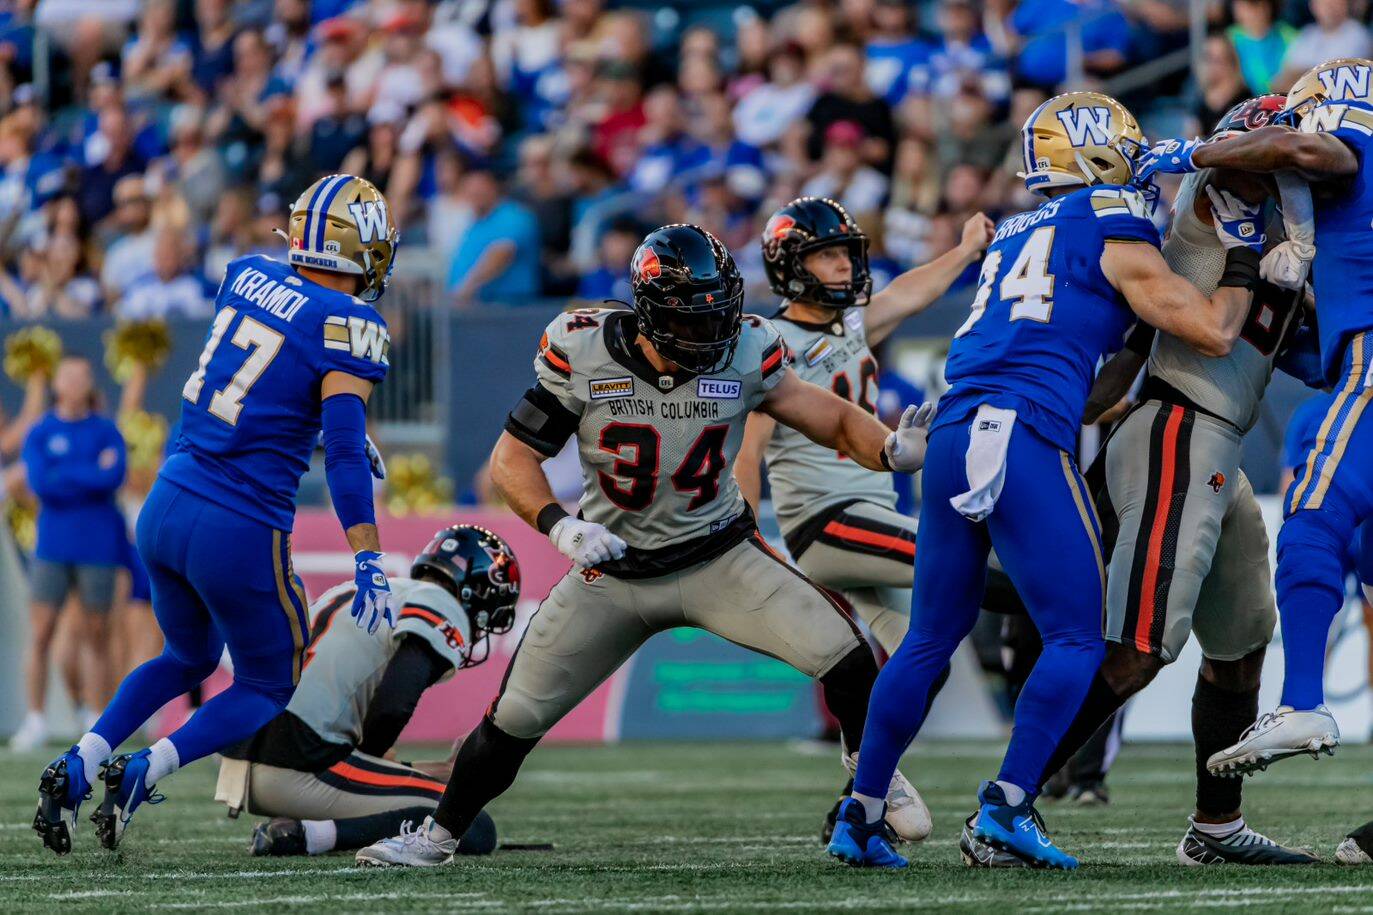 David Mackie (34) and the Lions hope to duplicate the success they had on June 22, when they beat the Blue Bombers 30-6 at IG Field in Winnipeg. Steven Chang, B.C. Lions photo